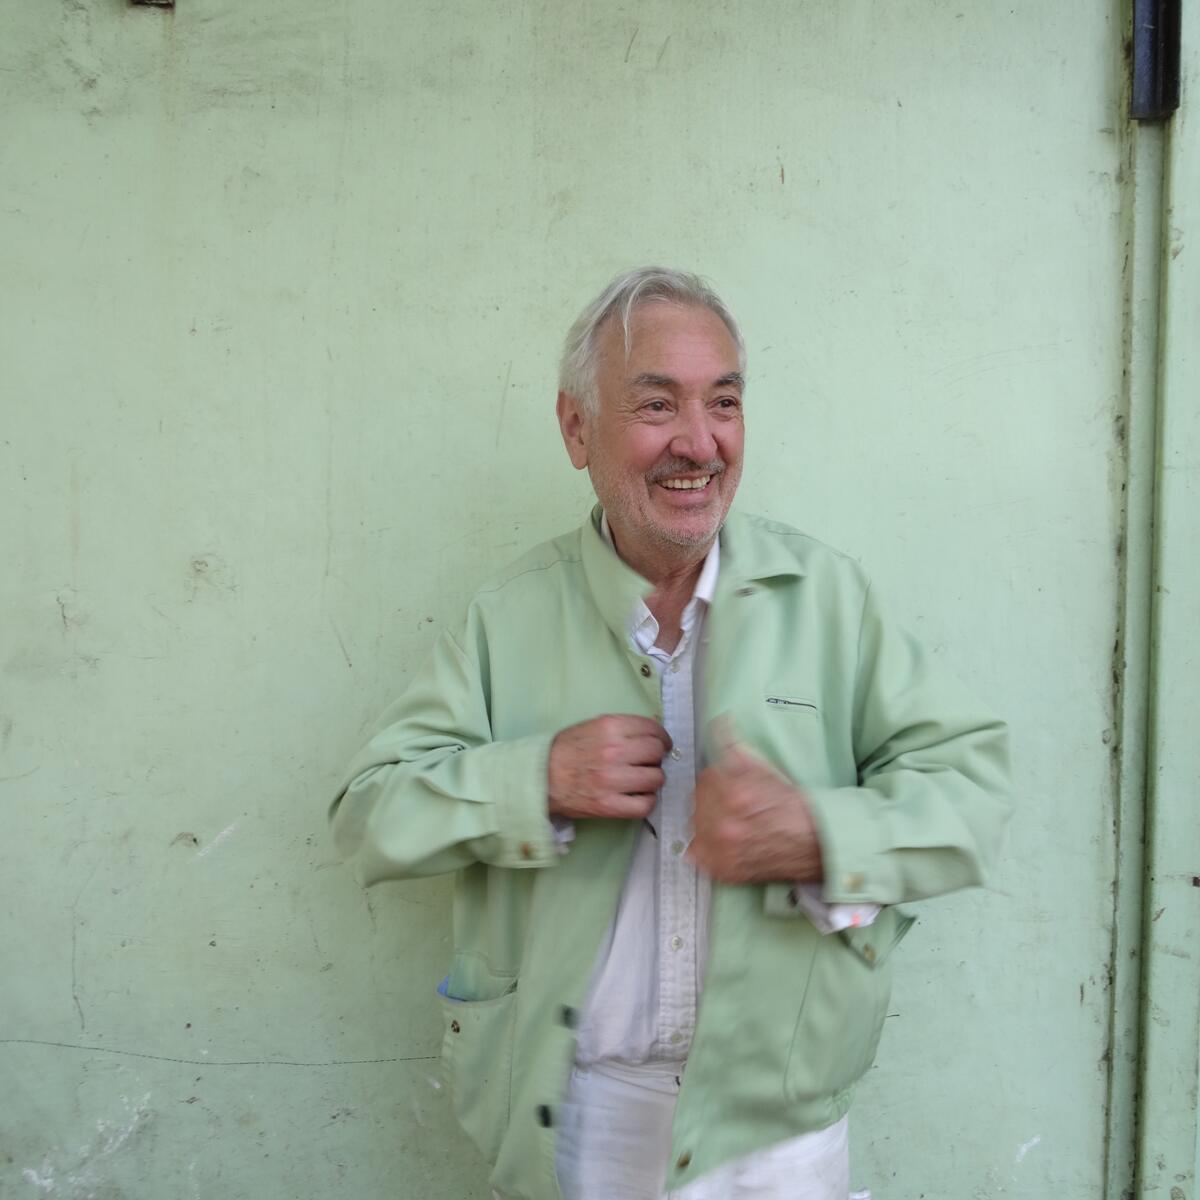 A man with gray hair wearing a mint green jacket smiles before a mint green wall